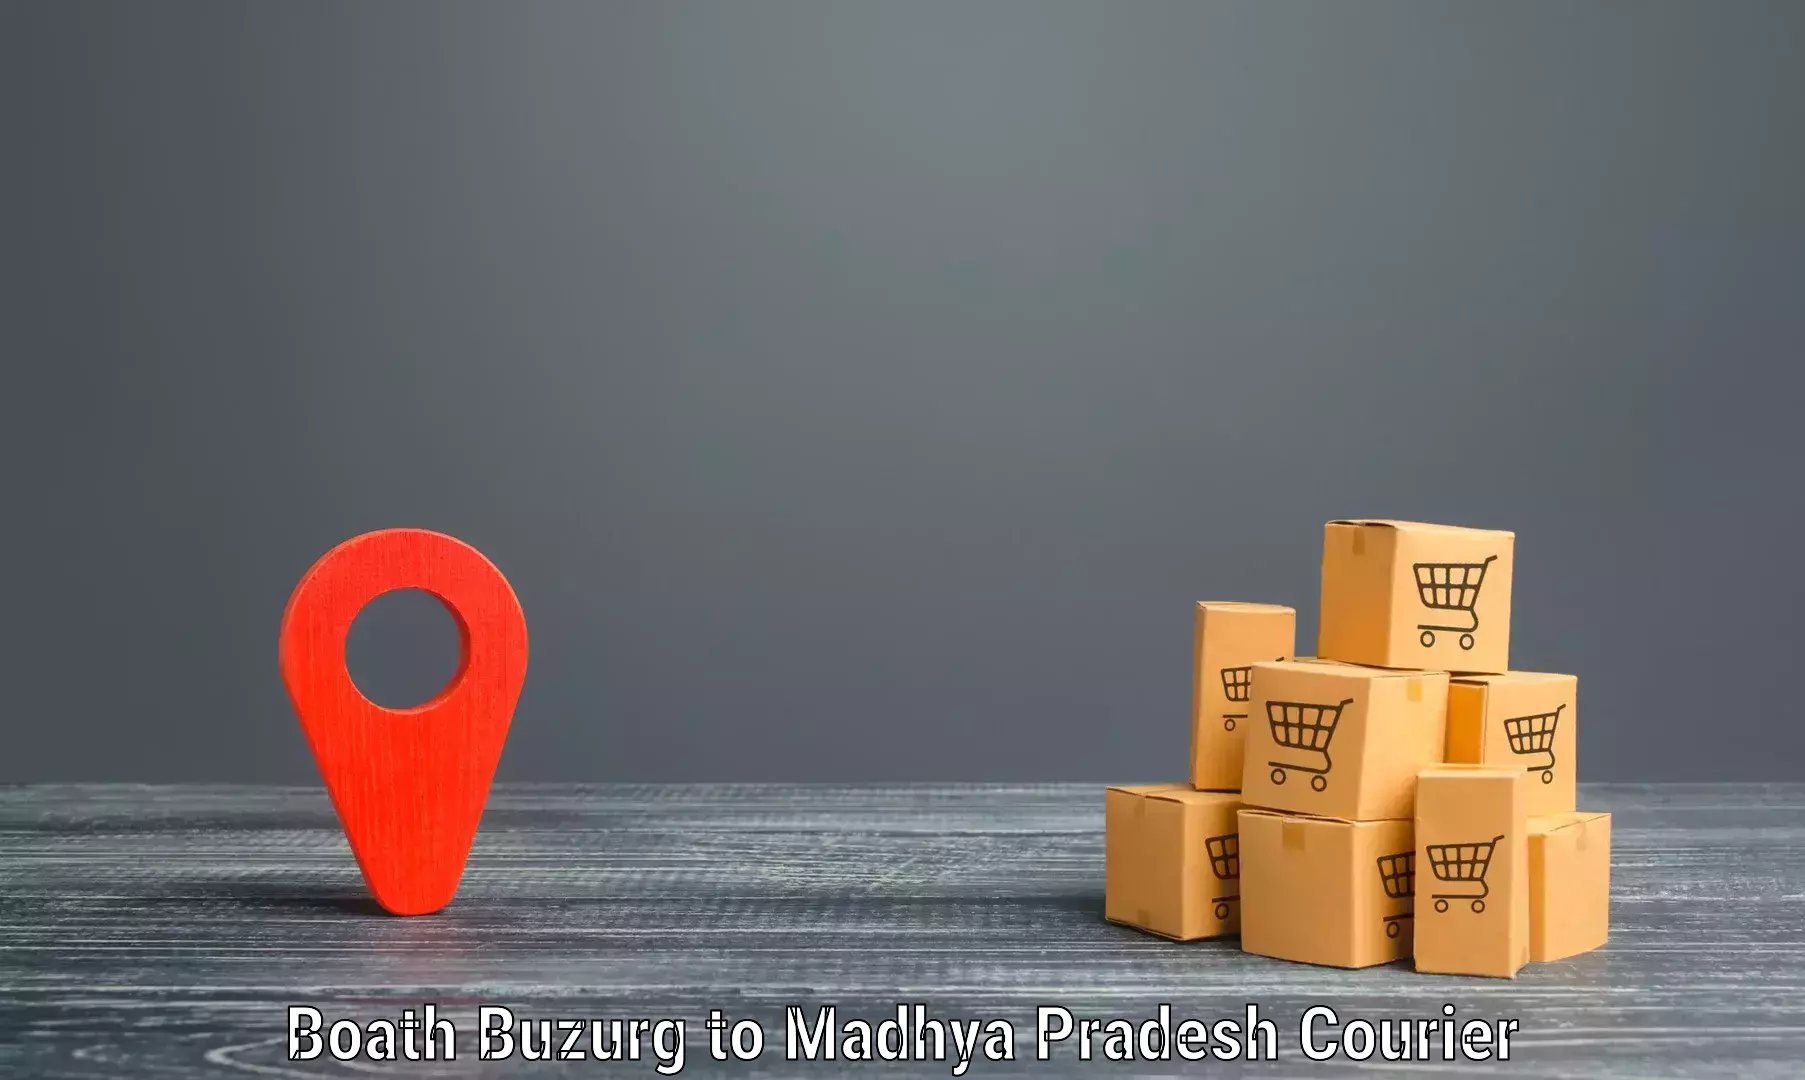 Round-the-clock parcel delivery Boath Buzurg to Gotegaon